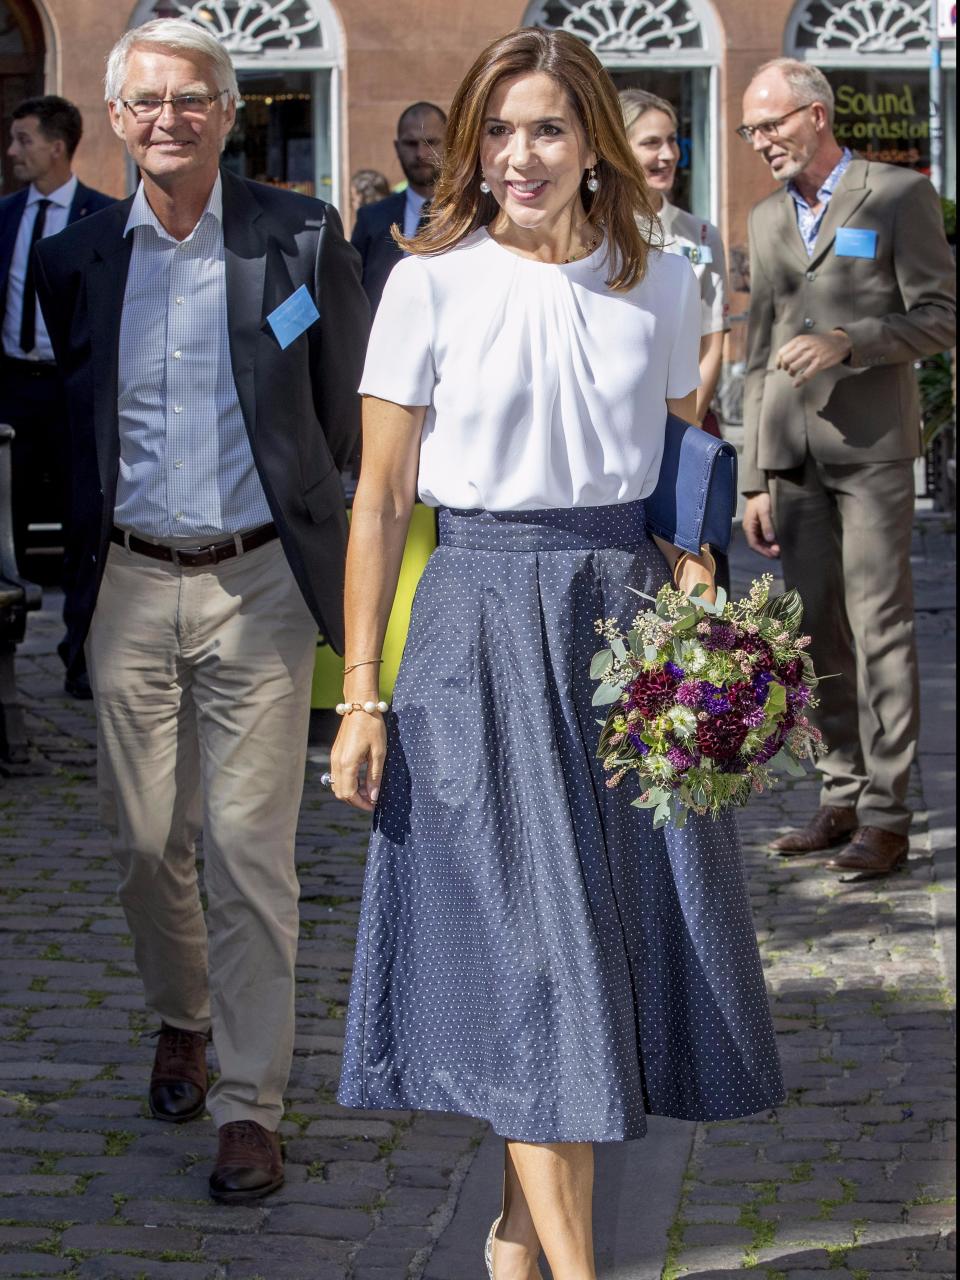 Princess Mary glows in chic ensemble